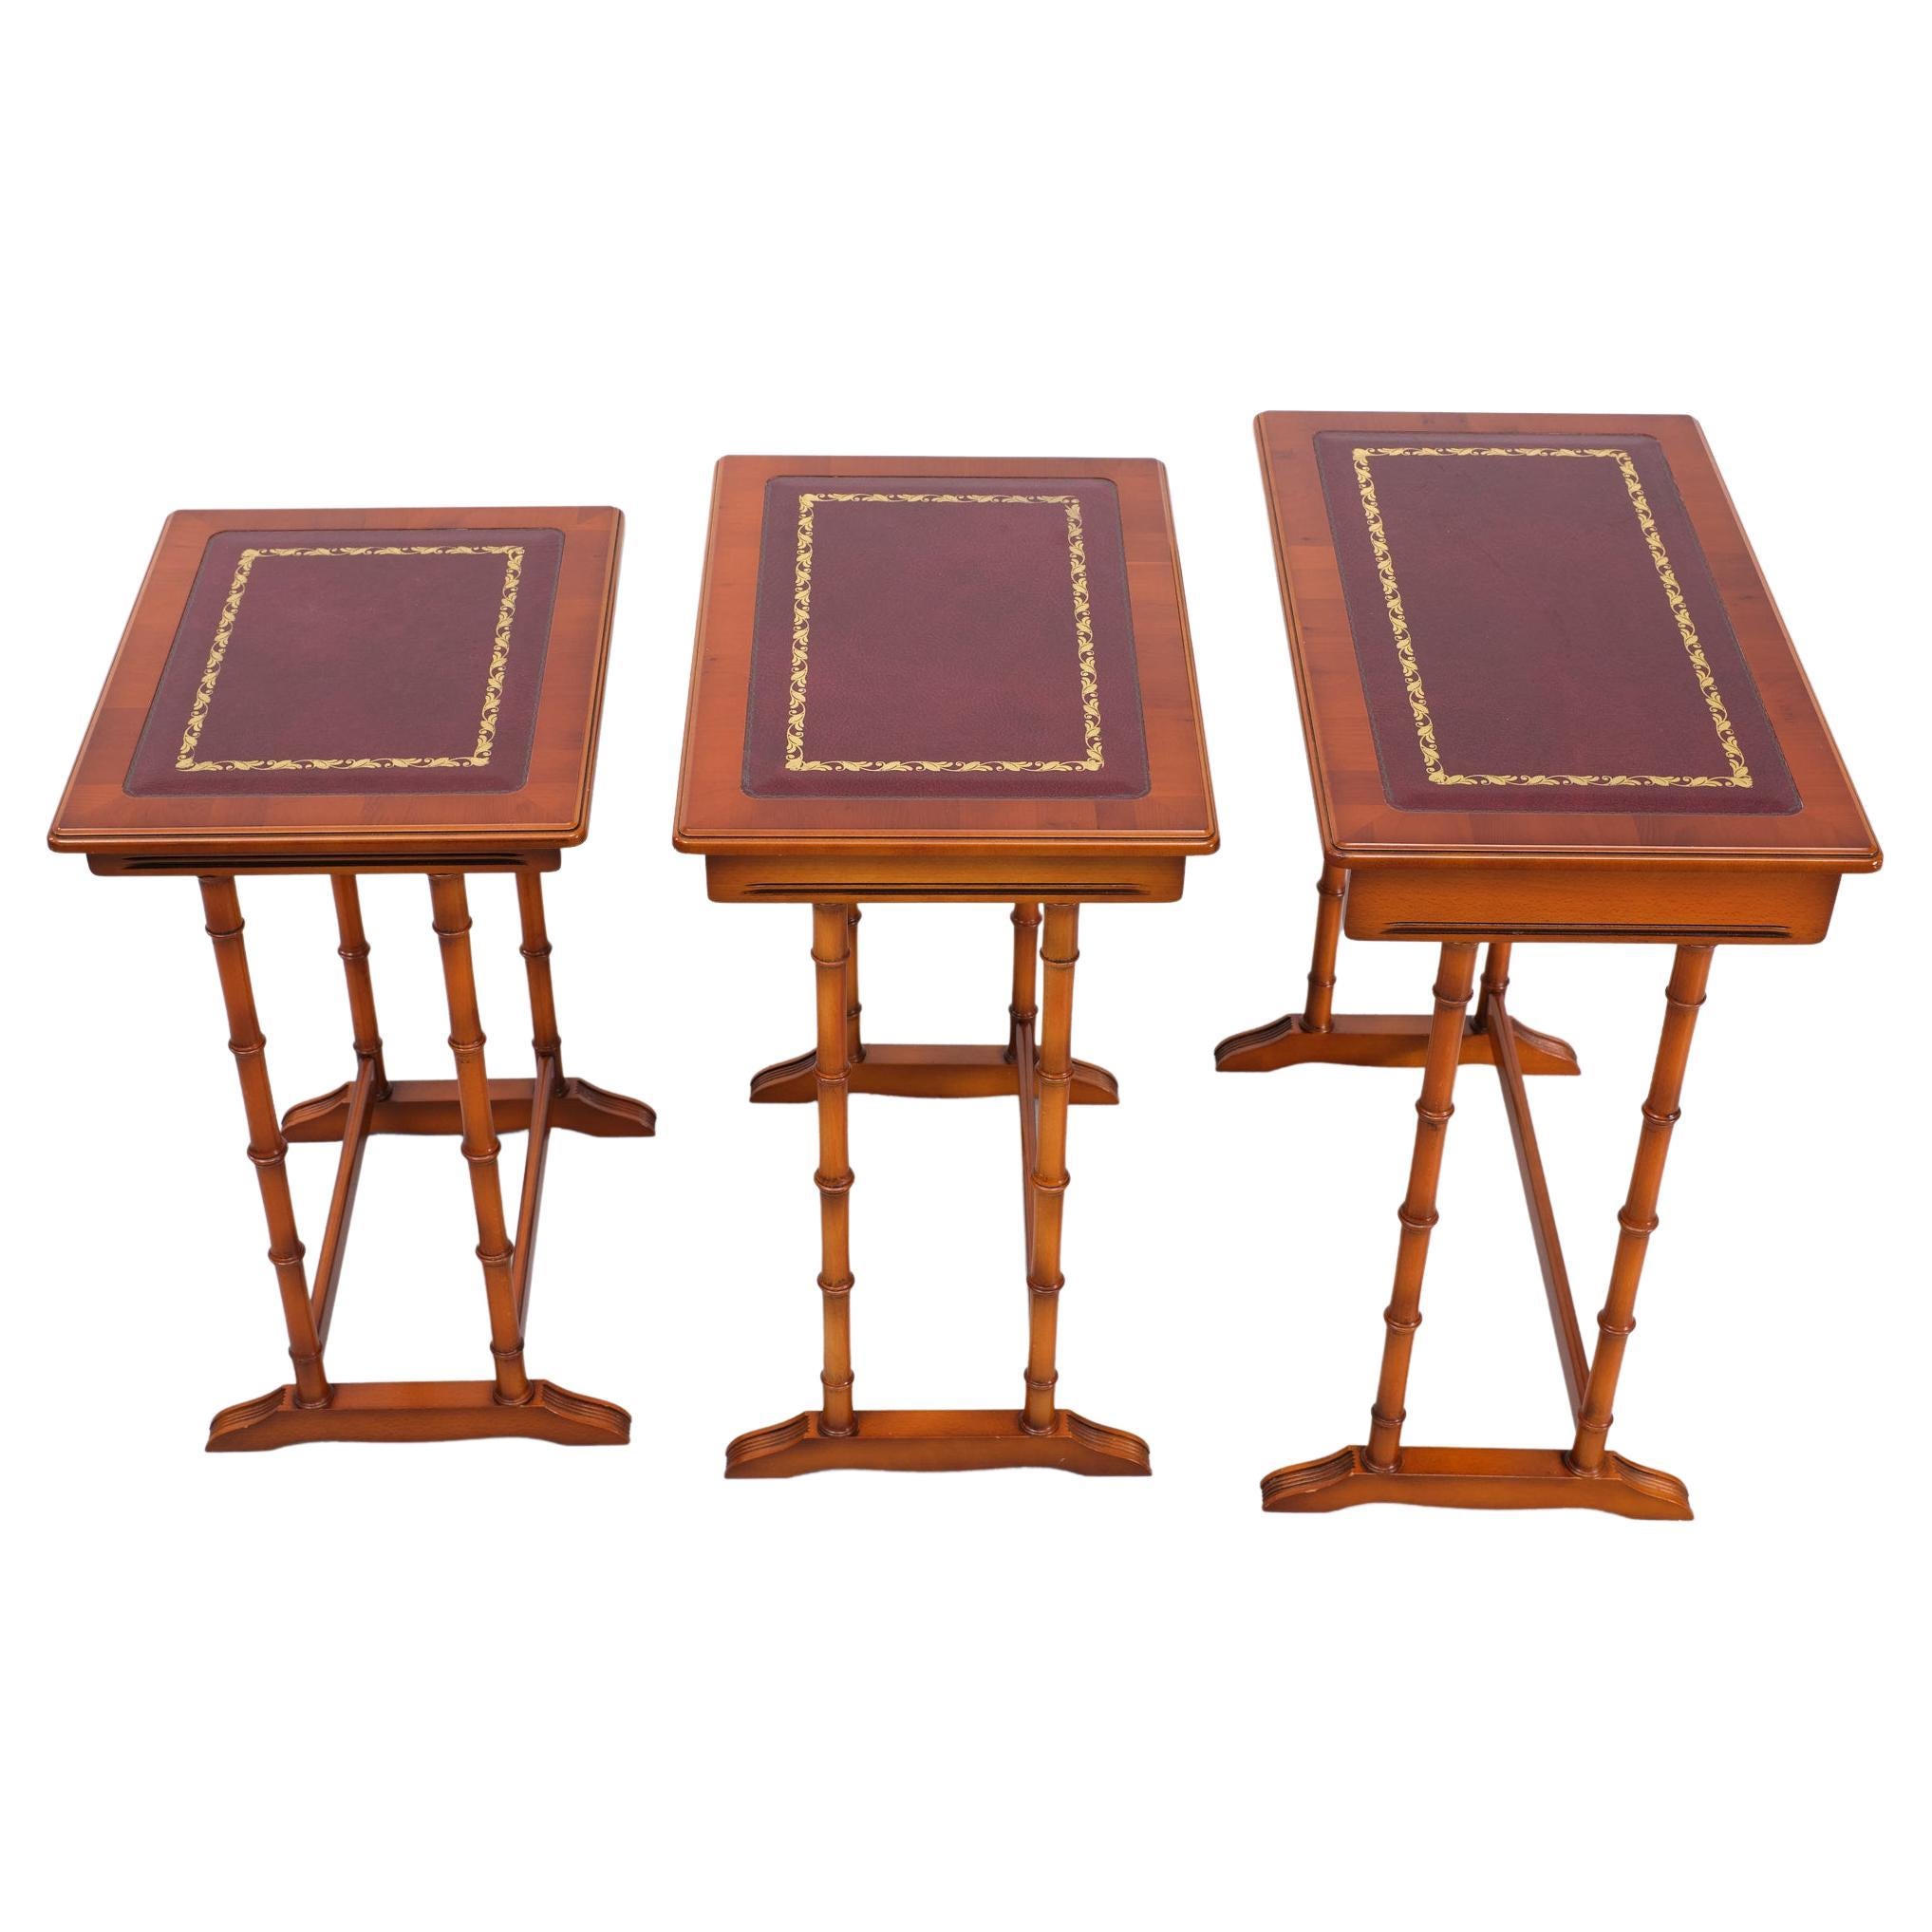 Late 20th Century   Exclusive English furniture  Cherry wood nesting tables  1970s  For Sale